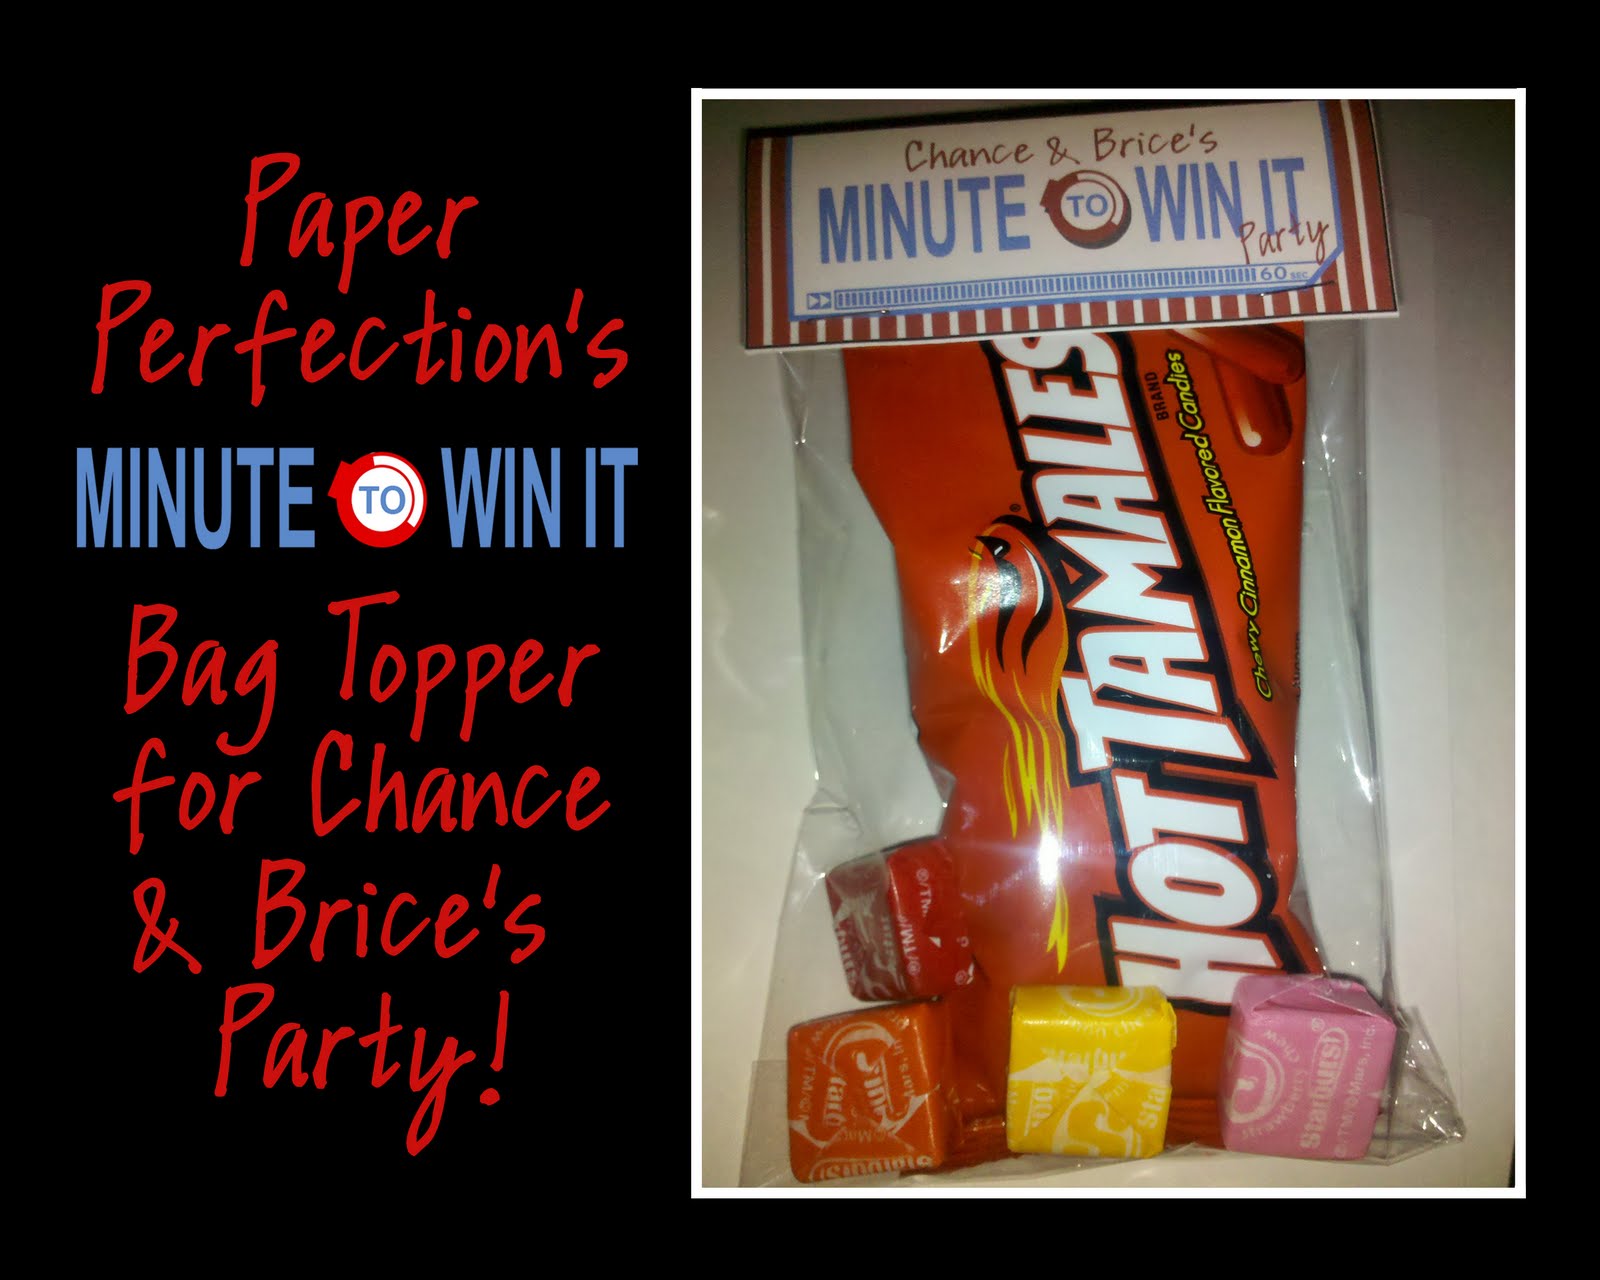 Paper Perfection: More Minute To Win It Party Pictures!